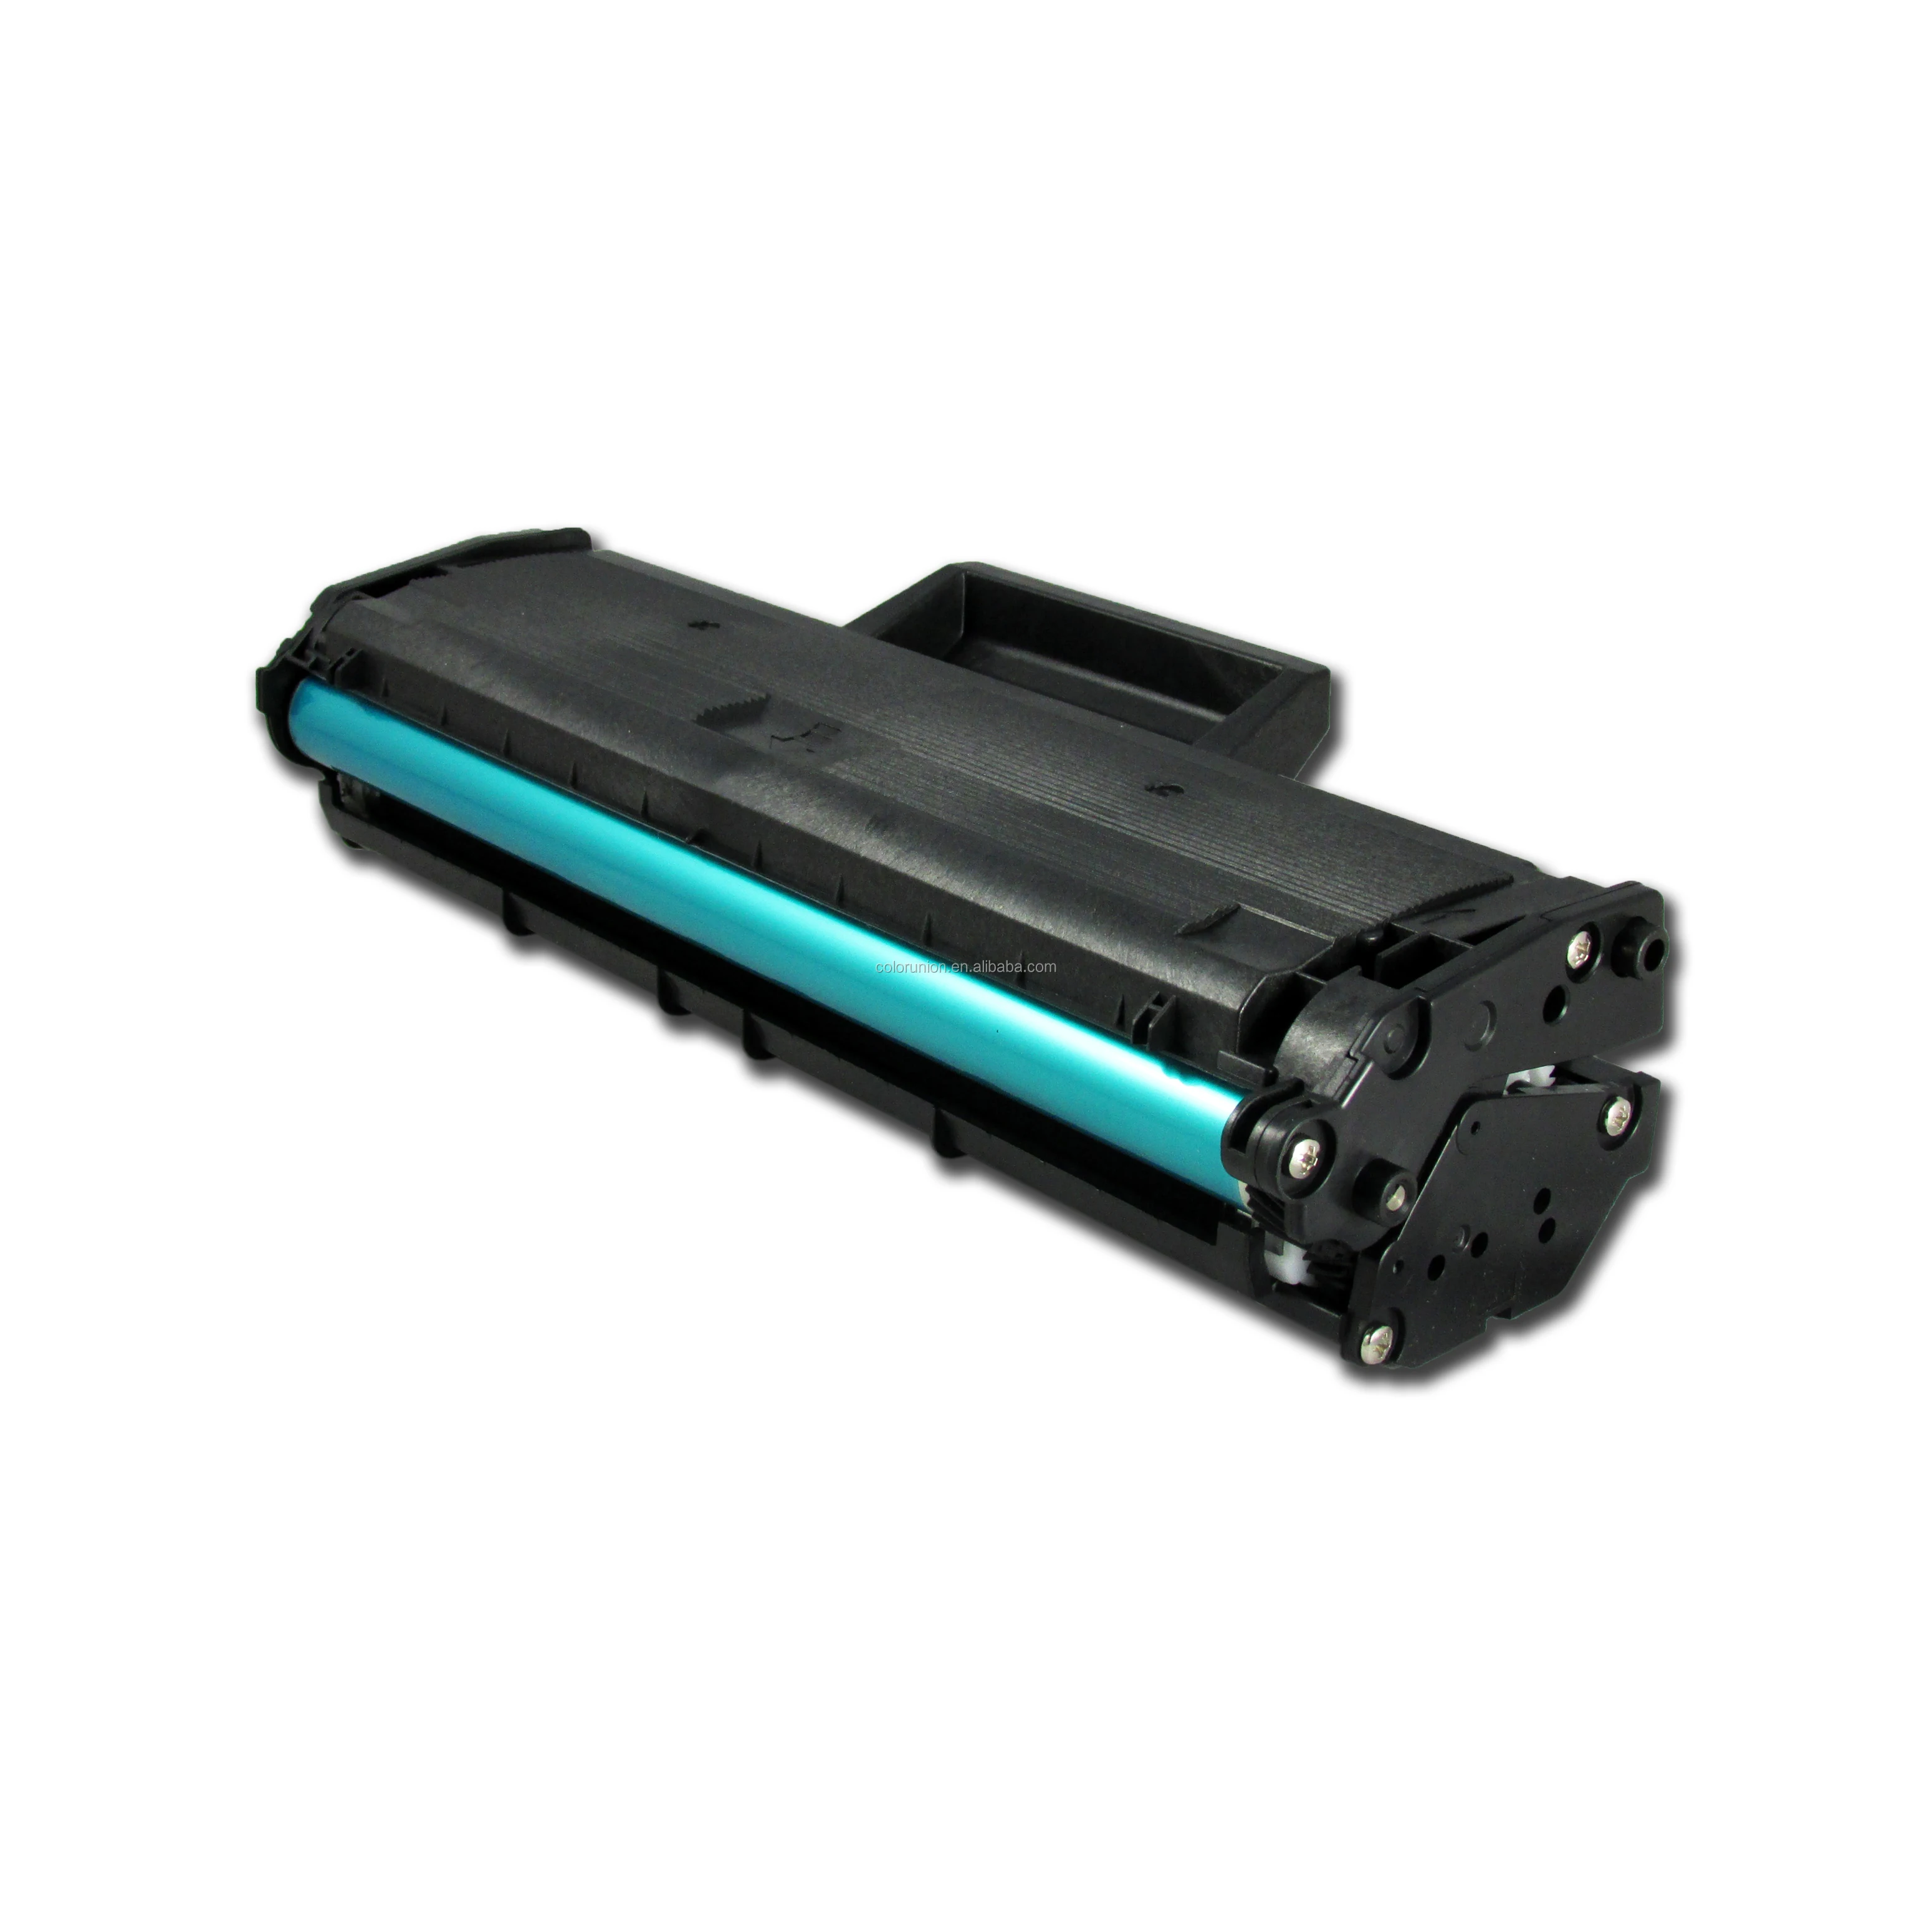 china products online euro toner cartridge MLT-D101S